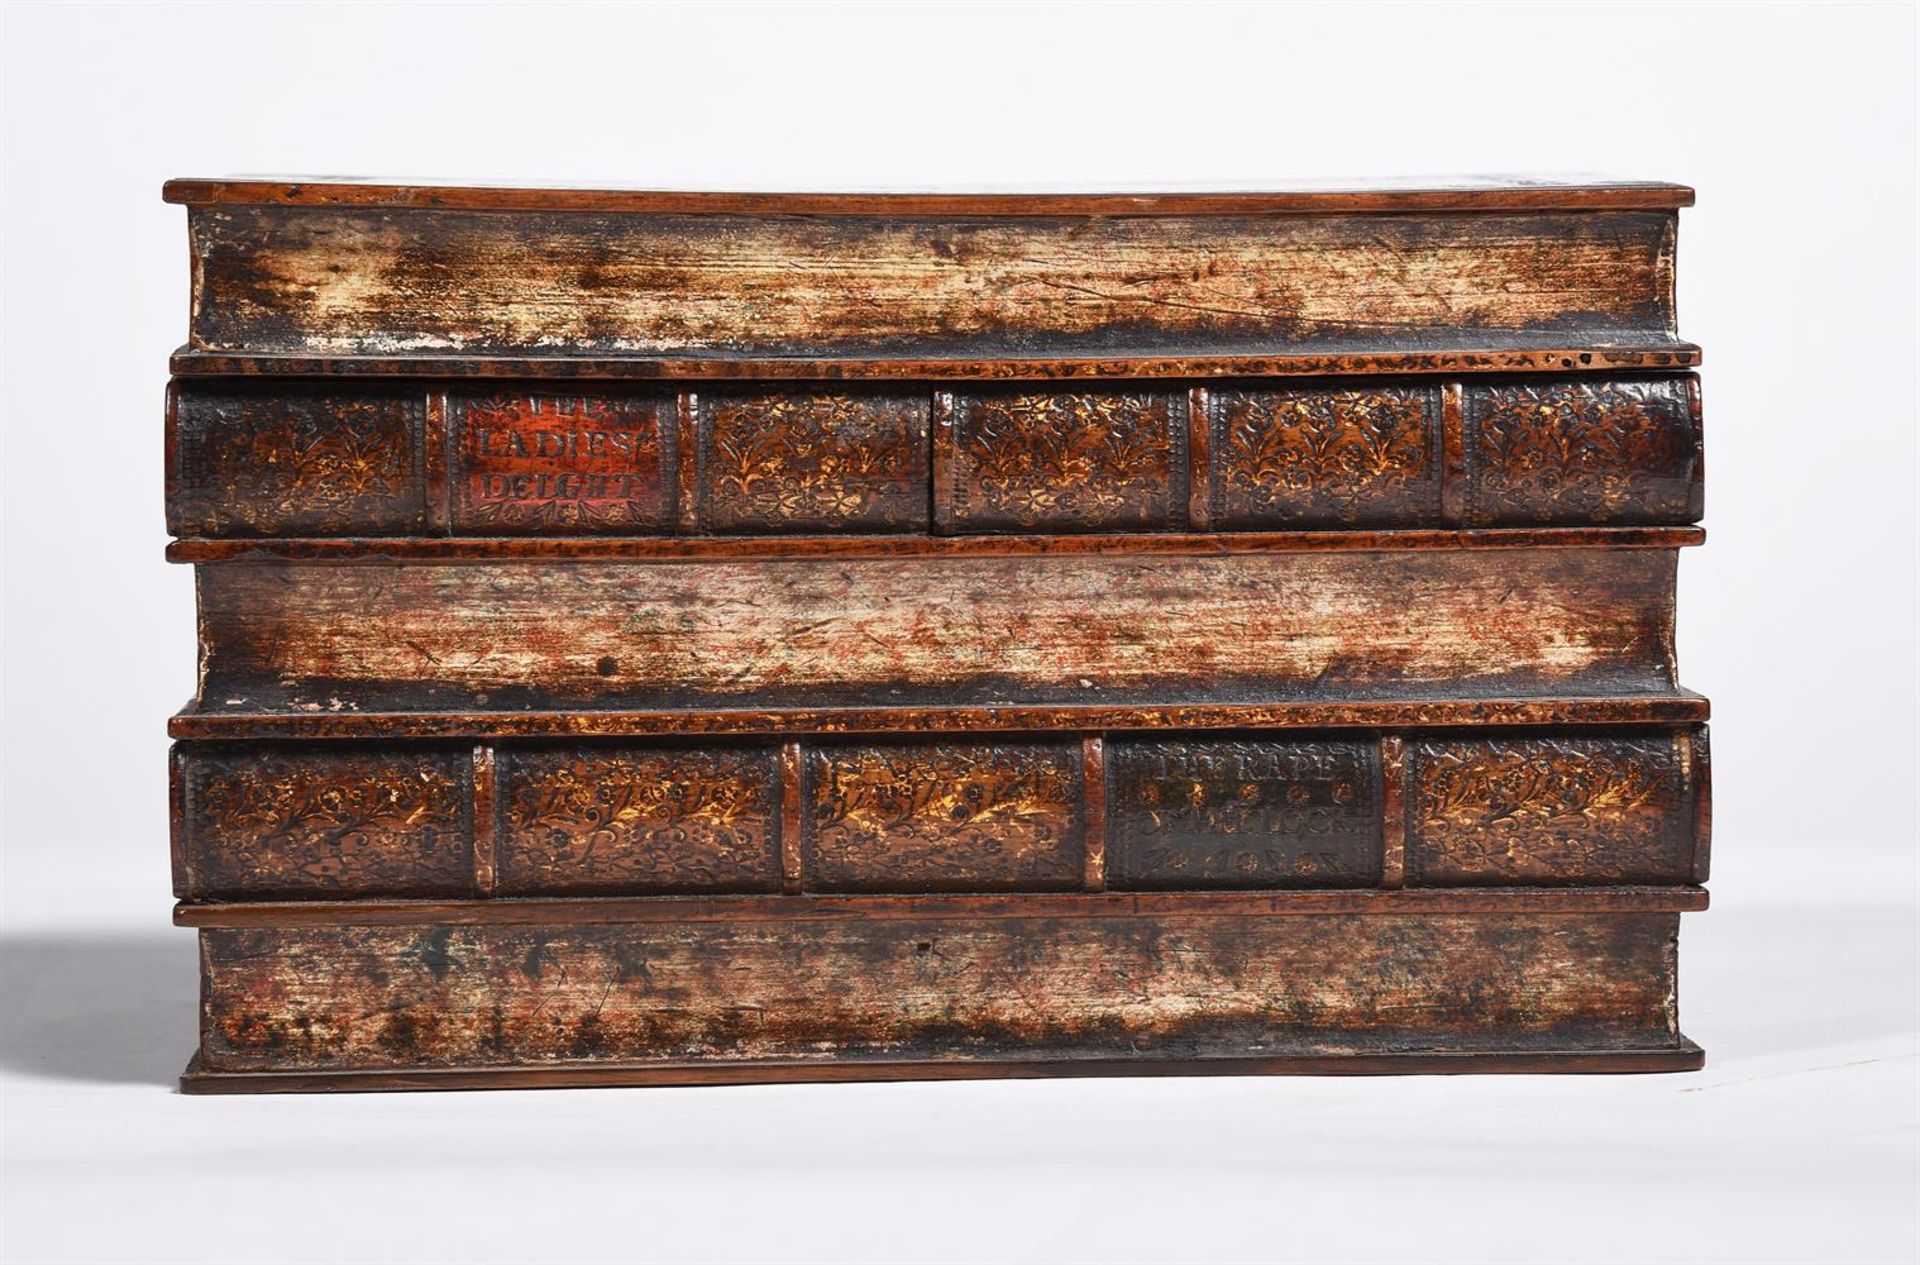 A GEORGE III WALNUT NOVELTY TEA CADDY IN THE FORM OF A STACK OF BOOKS, LATE 18TH/ EARLY 19TH CENTURY - Bild 3 aus 3